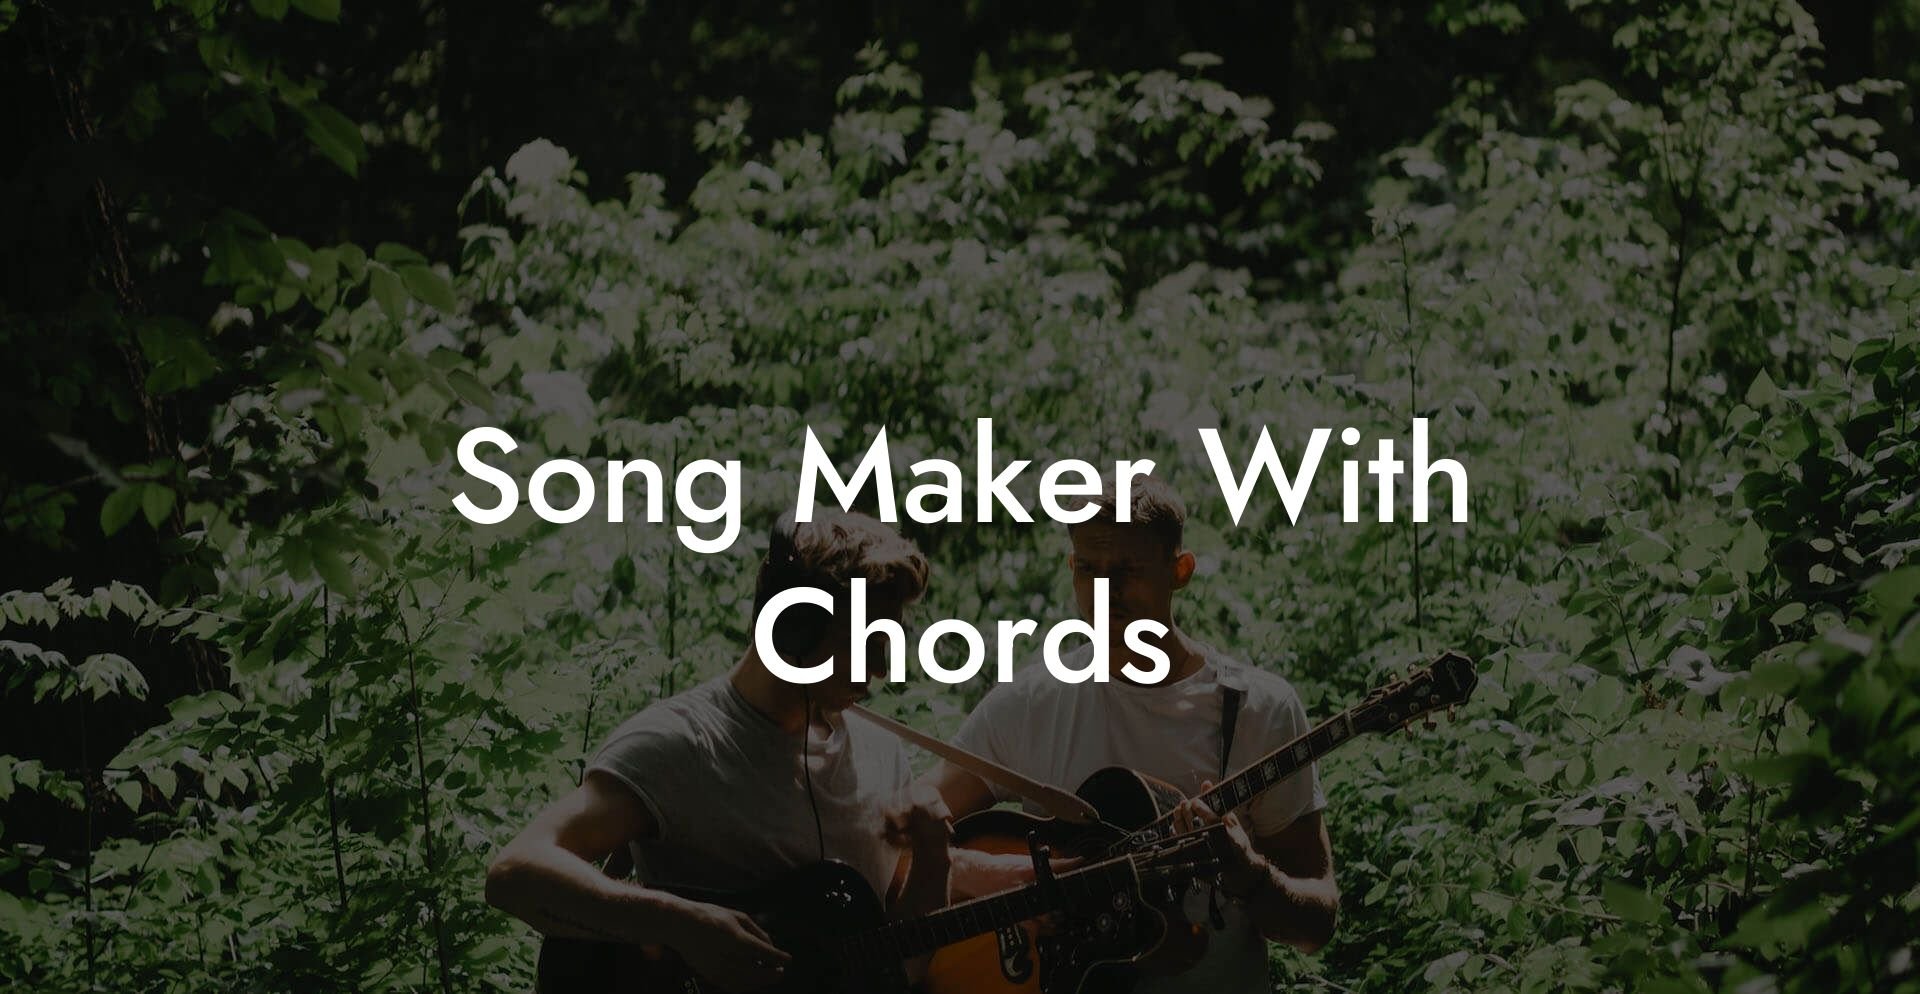 song maker with chords lyric assistant